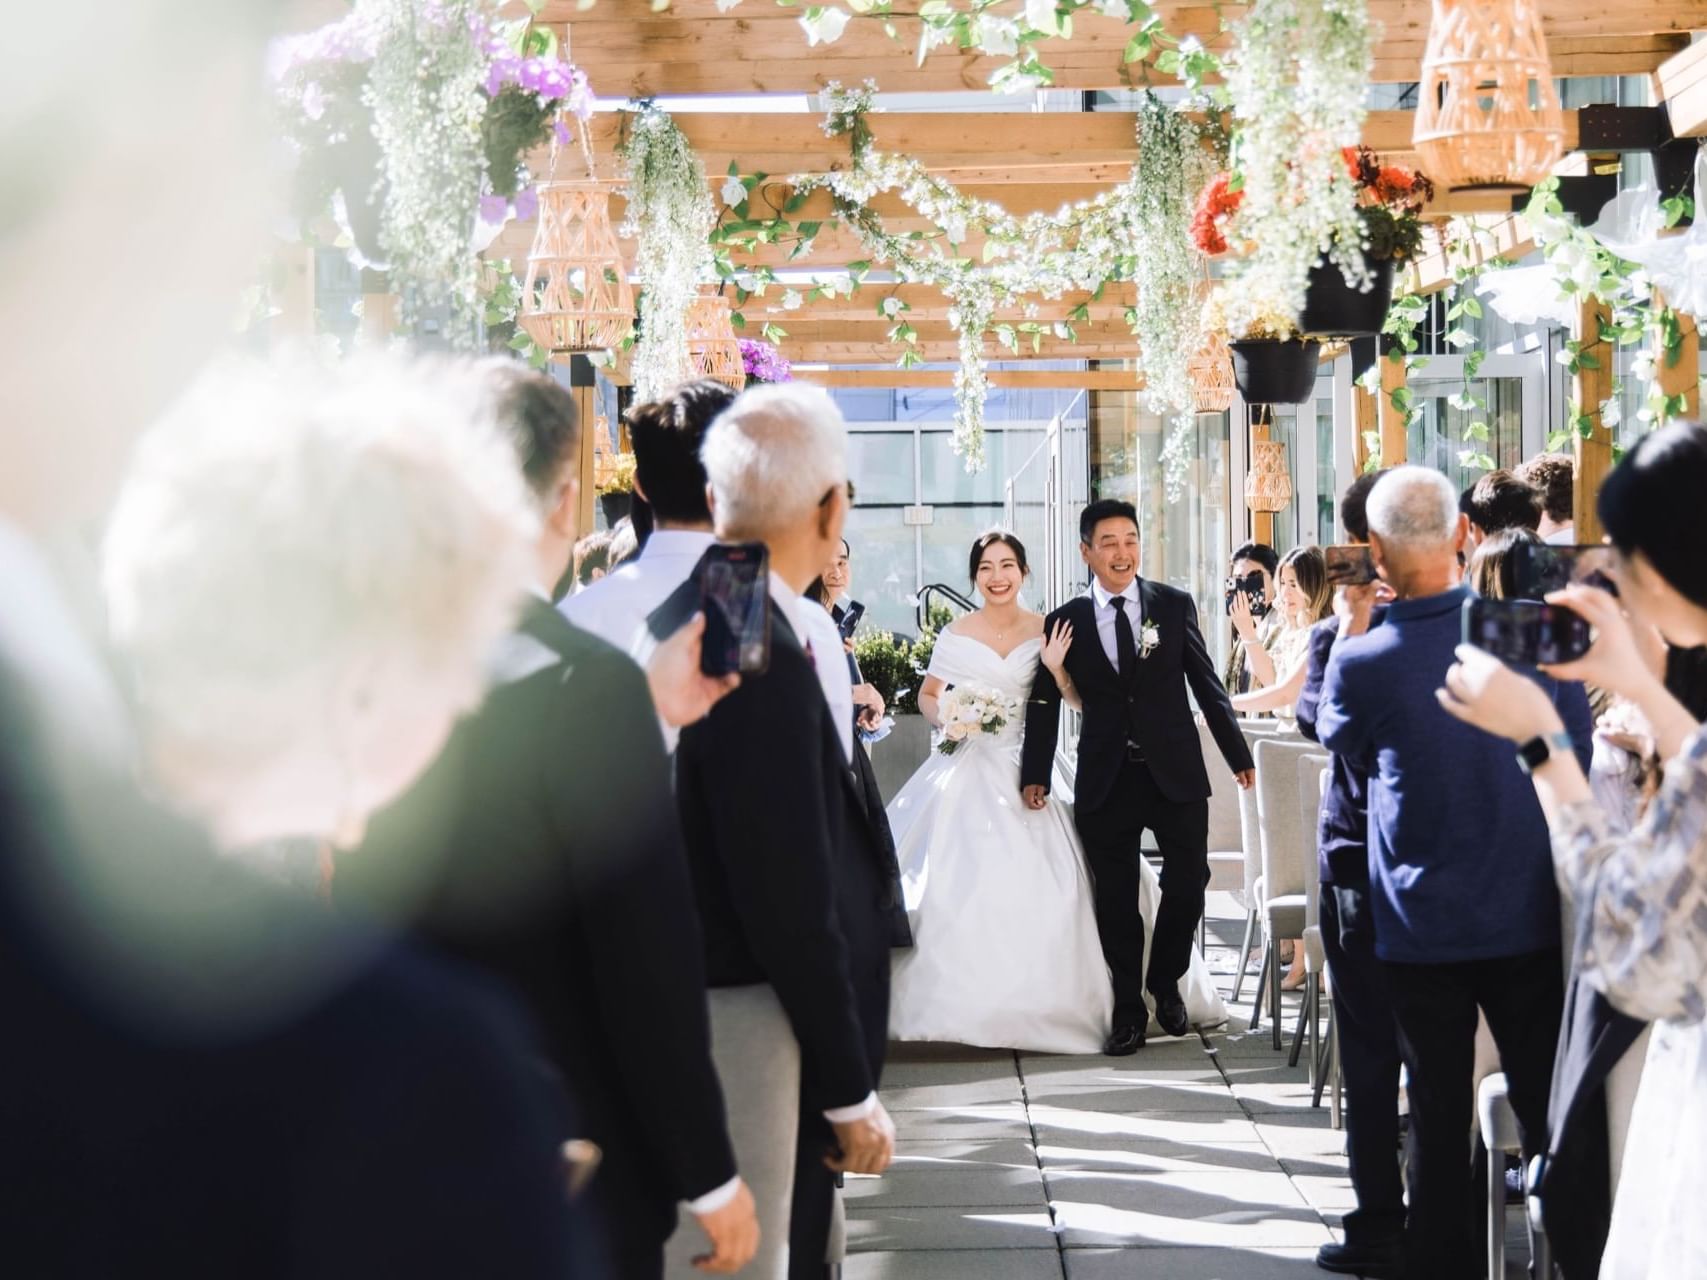 Bride walks with her father in a urban outdoor terrace with lots of guests